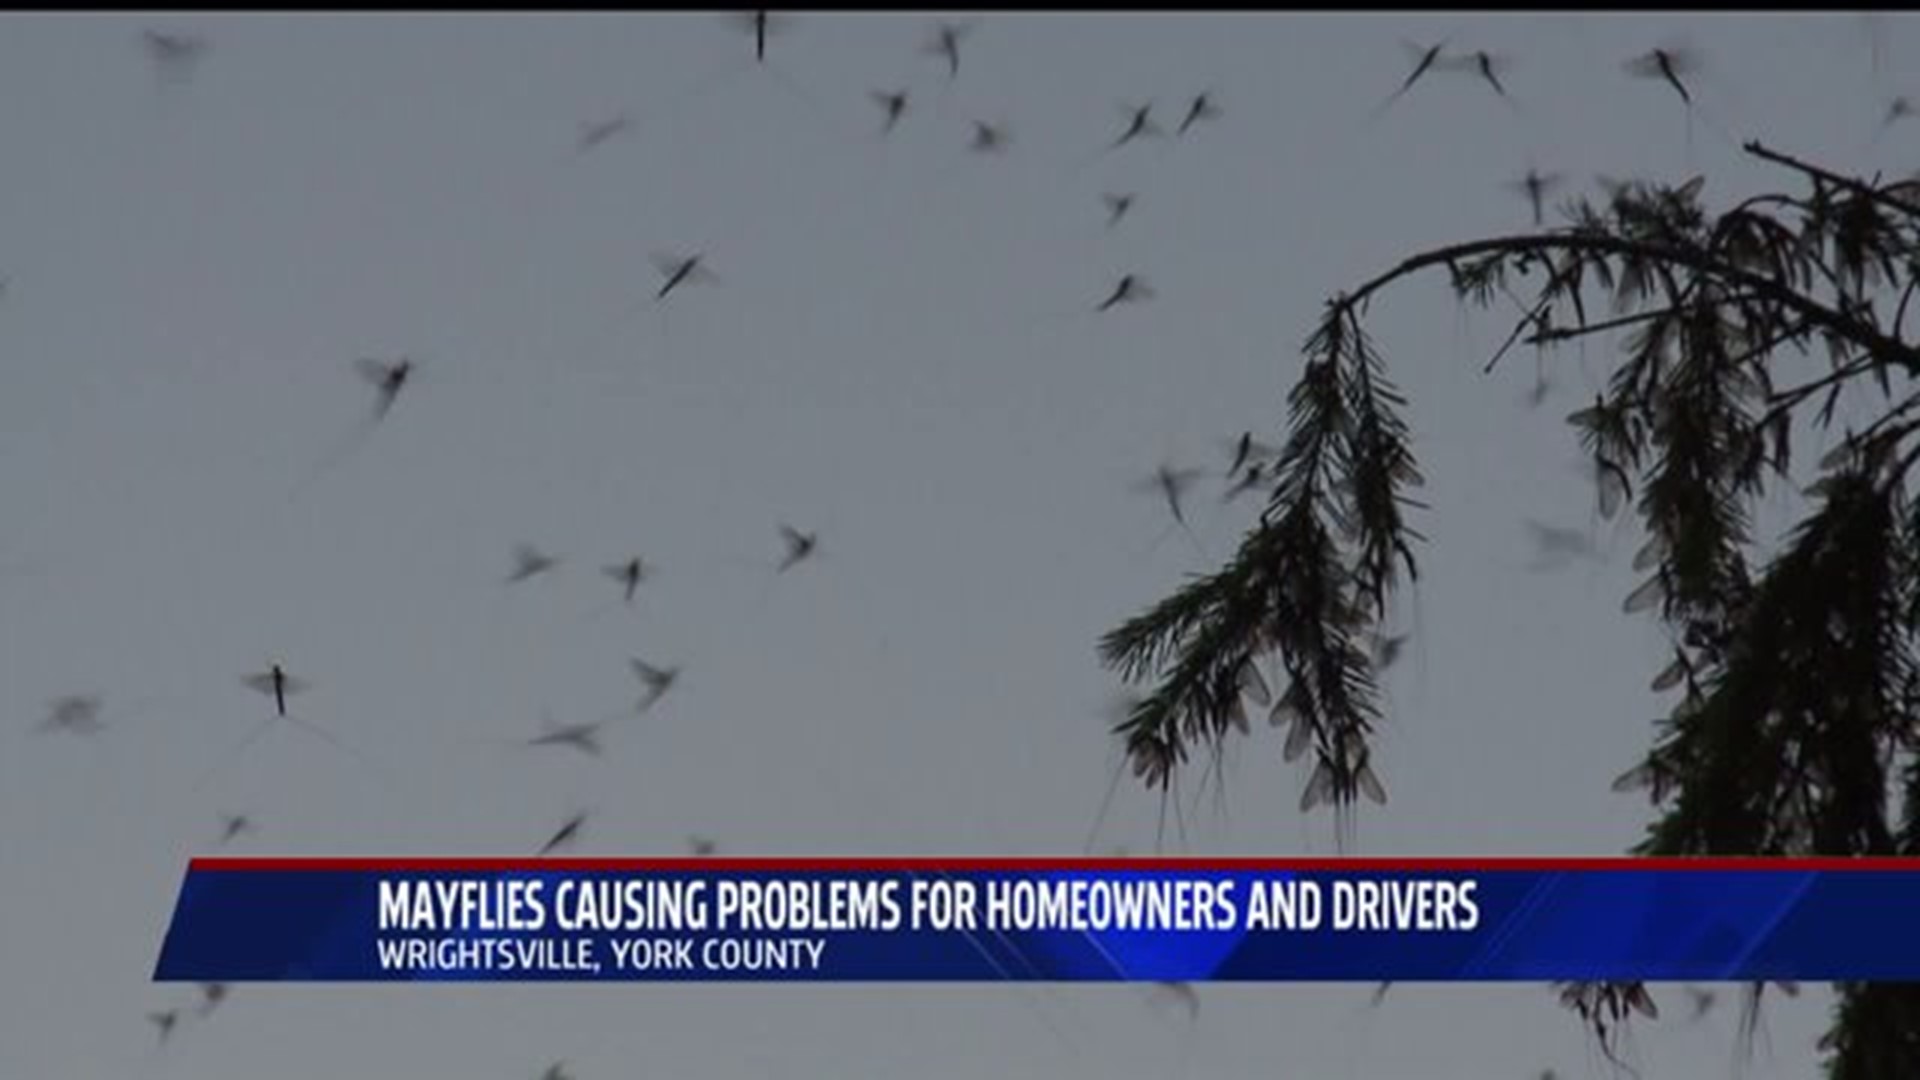 Mayflies In York Co Creating Problems For Drivers And Homeowners Images, Photos, Reviews